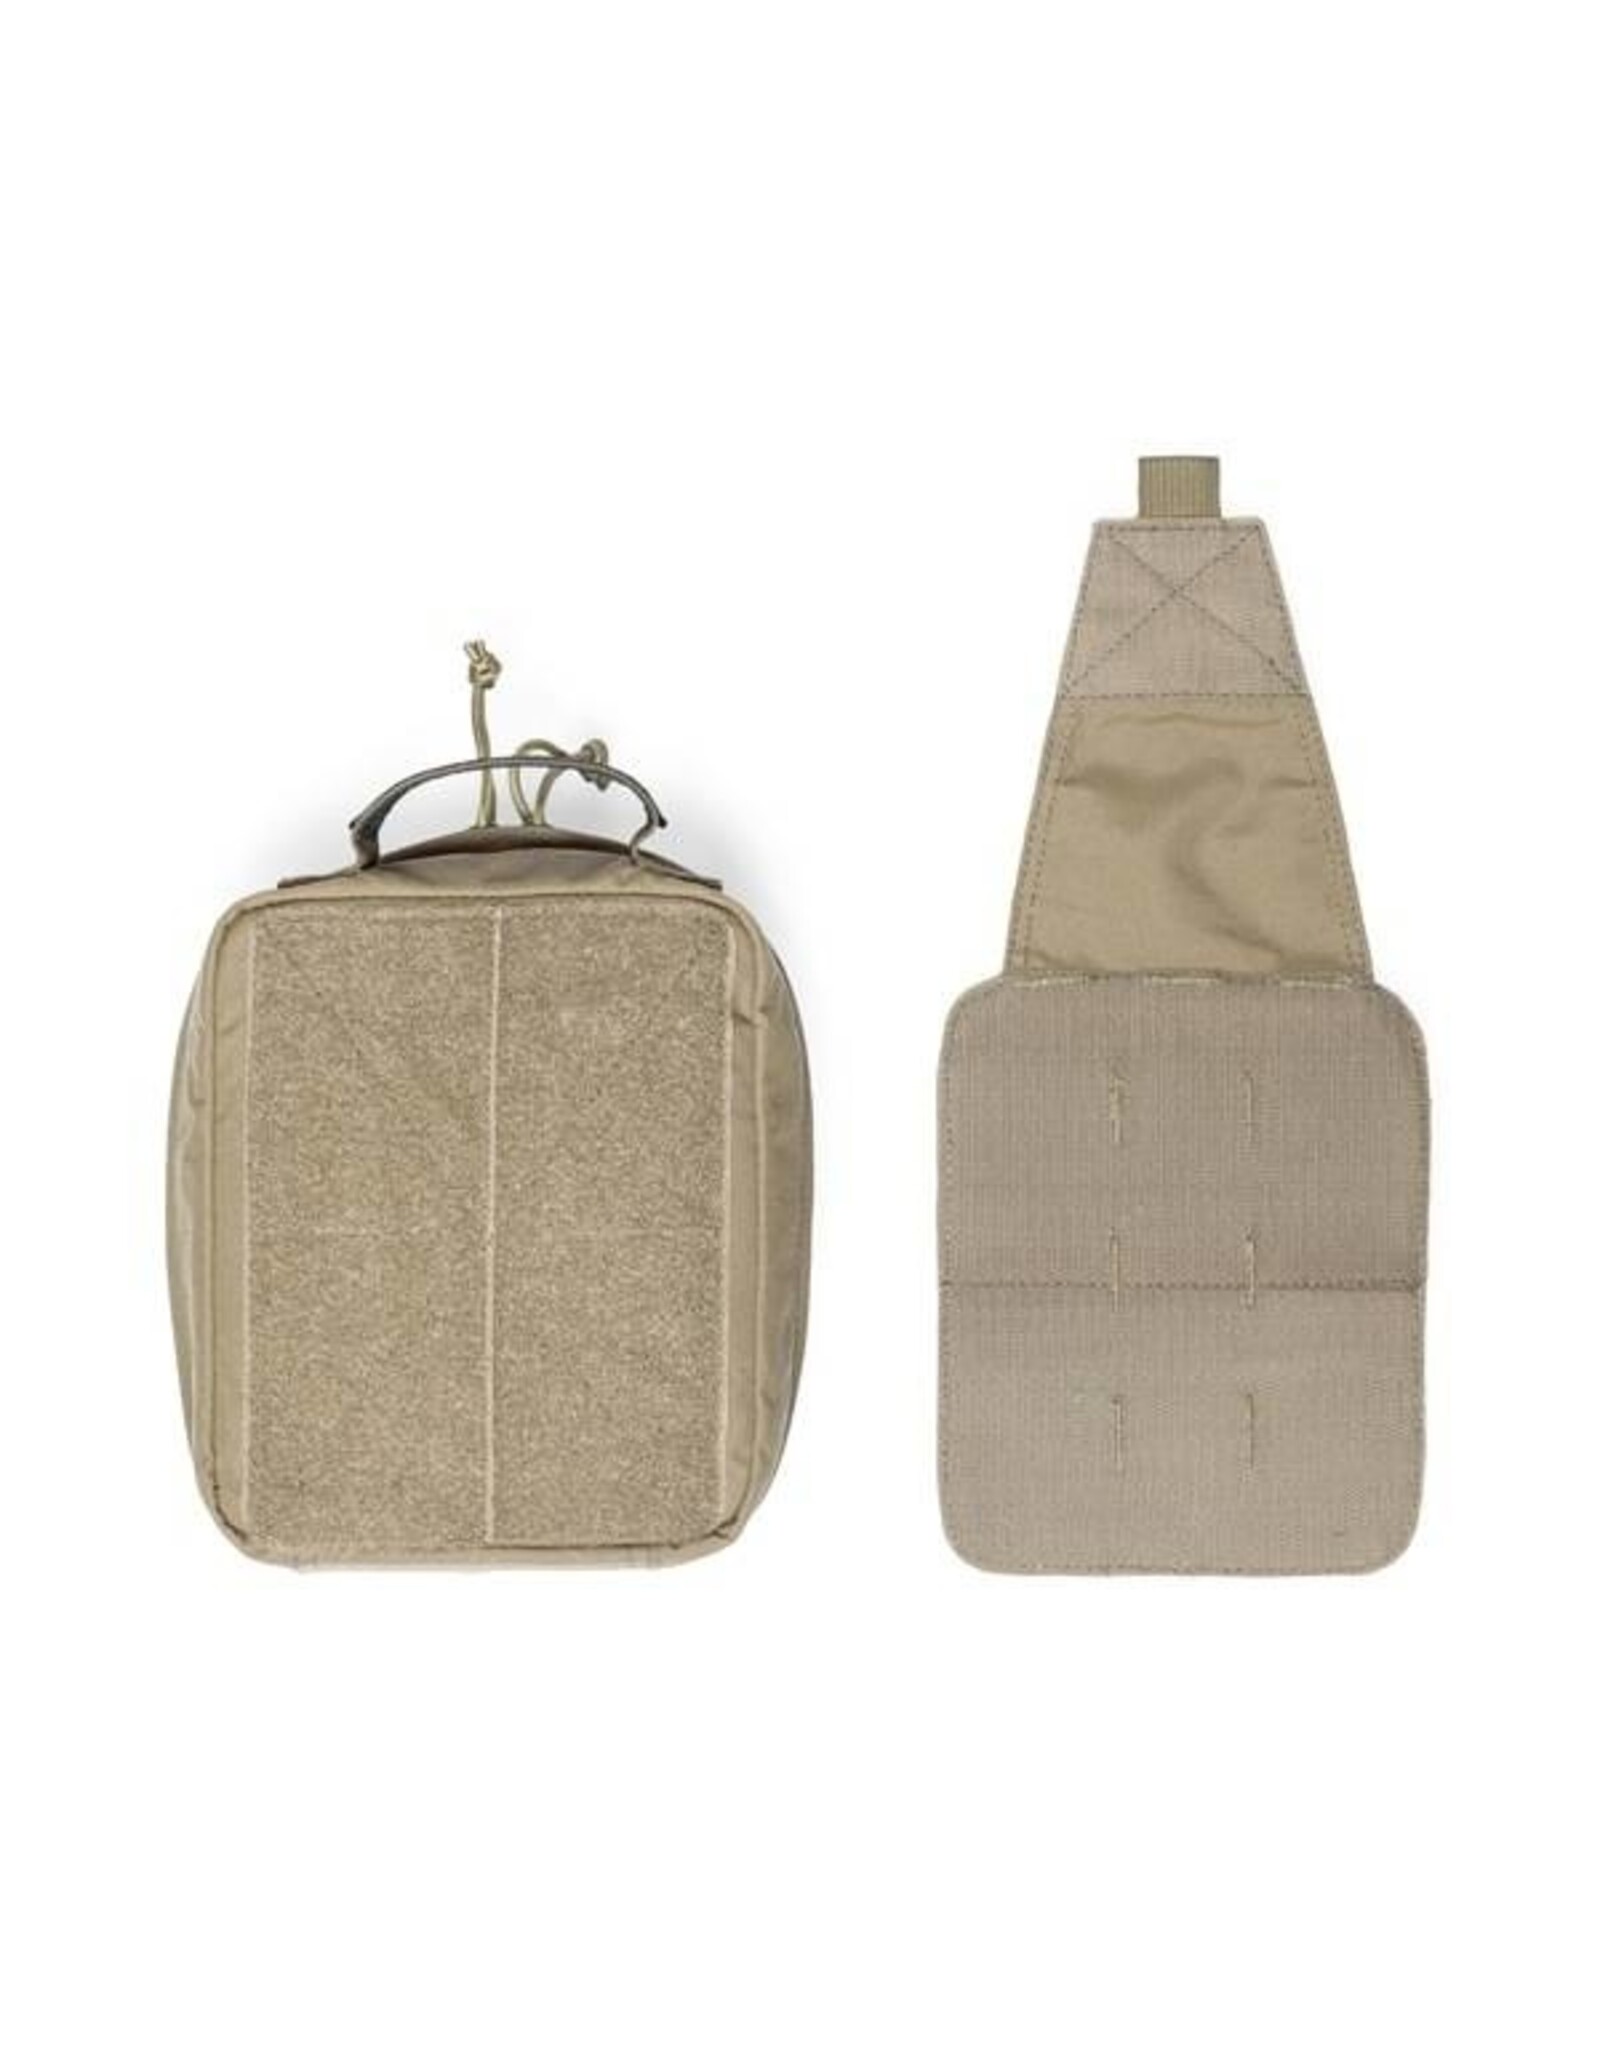 Warrior Elite OPS Medic Rip Off Pouch - Coyote Tan